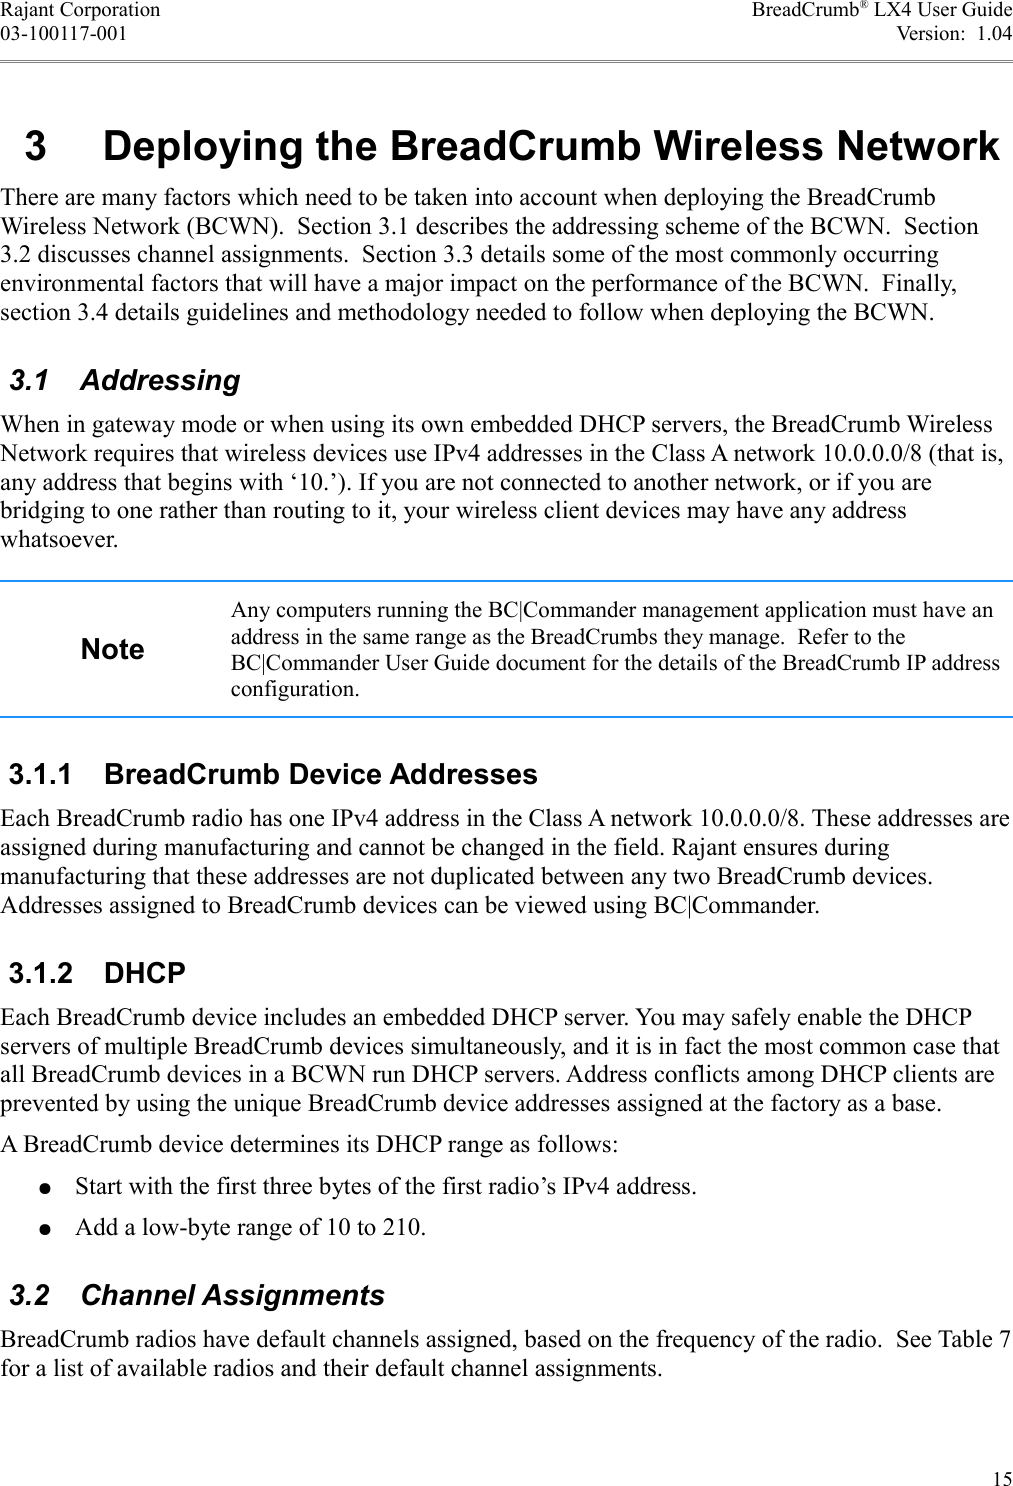 Rajant Corporation BreadCrumb® LX4 User Guide03-100117-001 Version:  1.04 3  Deploying the BreadCrumb Wireless NetworkThere are many factors which need to be taken into account when deploying the BreadCrumb Wireless Network (BCWN).  Section 3.1 describes the addressing scheme of the BCWN.  Section 3.2 discusses channel assignments.  Section 3.3 details some of the most commonly occurring environmental factors that will have a major impact on the performance of the BCWN.  Finally, section 3.4 details guidelines and methodology needed to follow when deploying the BCWN. 3.1  AddressingWhen in gateway mode or when using its own embedded DHCP servers, the BreadCrumb Wireless Network requires that wireless devices use IPv4 addresses in the Class A network 10.0.0.0/8 (that is, any address that begins with ‘10.’). If you are not connected to another network, or if you are bridging to one rather than routing to it, your wireless client devices may have any address whatsoever.NoteAny computers running the BC|Commander management application must have an address in the same range as the BreadCrumbs they manage.  Refer to the BC|Commander User Guide document for the details of the BreadCrumb IP address configuration. 3.1.1  BreadCrumb Device AddressesEach BreadCrumb radio has one IPv4 address in the Class A network 10.0.0.0/8. These addresses are assigned during manufacturing and cannot be changed in the field. Rajant ensures during manufacturing that these addresses are not duplicated between any two BreadCrumb devices. Addresses assigned to BreadCrumb devices can be viewed using BC|Commander. 3.1.2  DHCPEach BreadCrumb device includes an embedded DHCP server. You may safely enable the DHCP servers of multiple BreadCrumb devices simultaneously, and it is in fact the most common case that all BreadCrumb devices in a BCWN run DHCP servers. Address conflicts among DHCP clients are prevented by using the unique BreadCrumb device addresses assigned at the factory as a base.A BreadCrumb device determines its DHCP range as follows:●Start with the first three bytes of the first radio’s IPv4 address.●Add a low-byte range of 10 to 210. 3.2  Channel AssignmentsBreadCrumb radios have default channels assigned, based on the frequency of the radio.  See Table 7 for a list of available radios and their default channel assignments.15